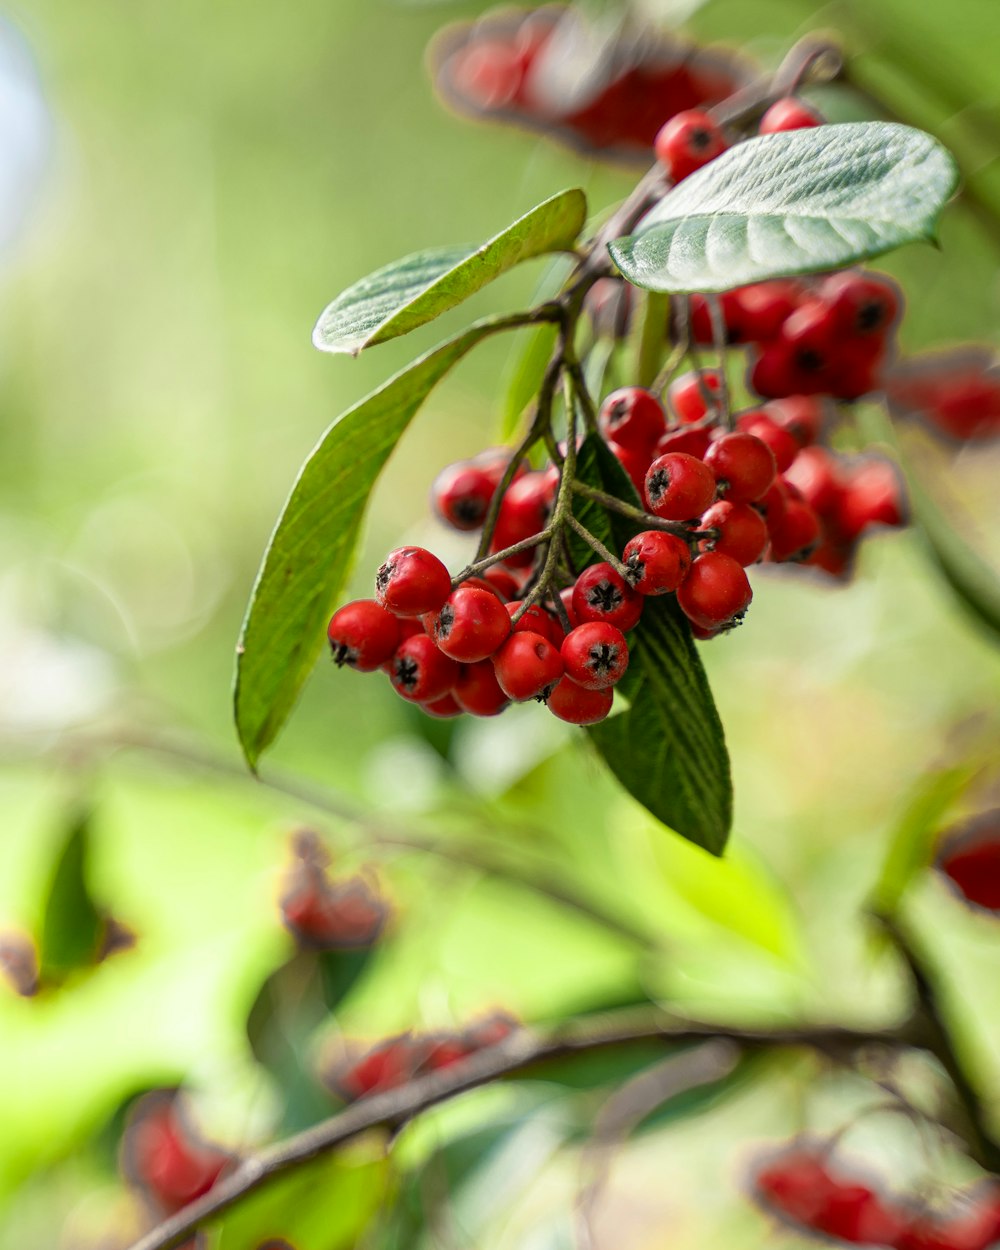 close-up photo of red berries